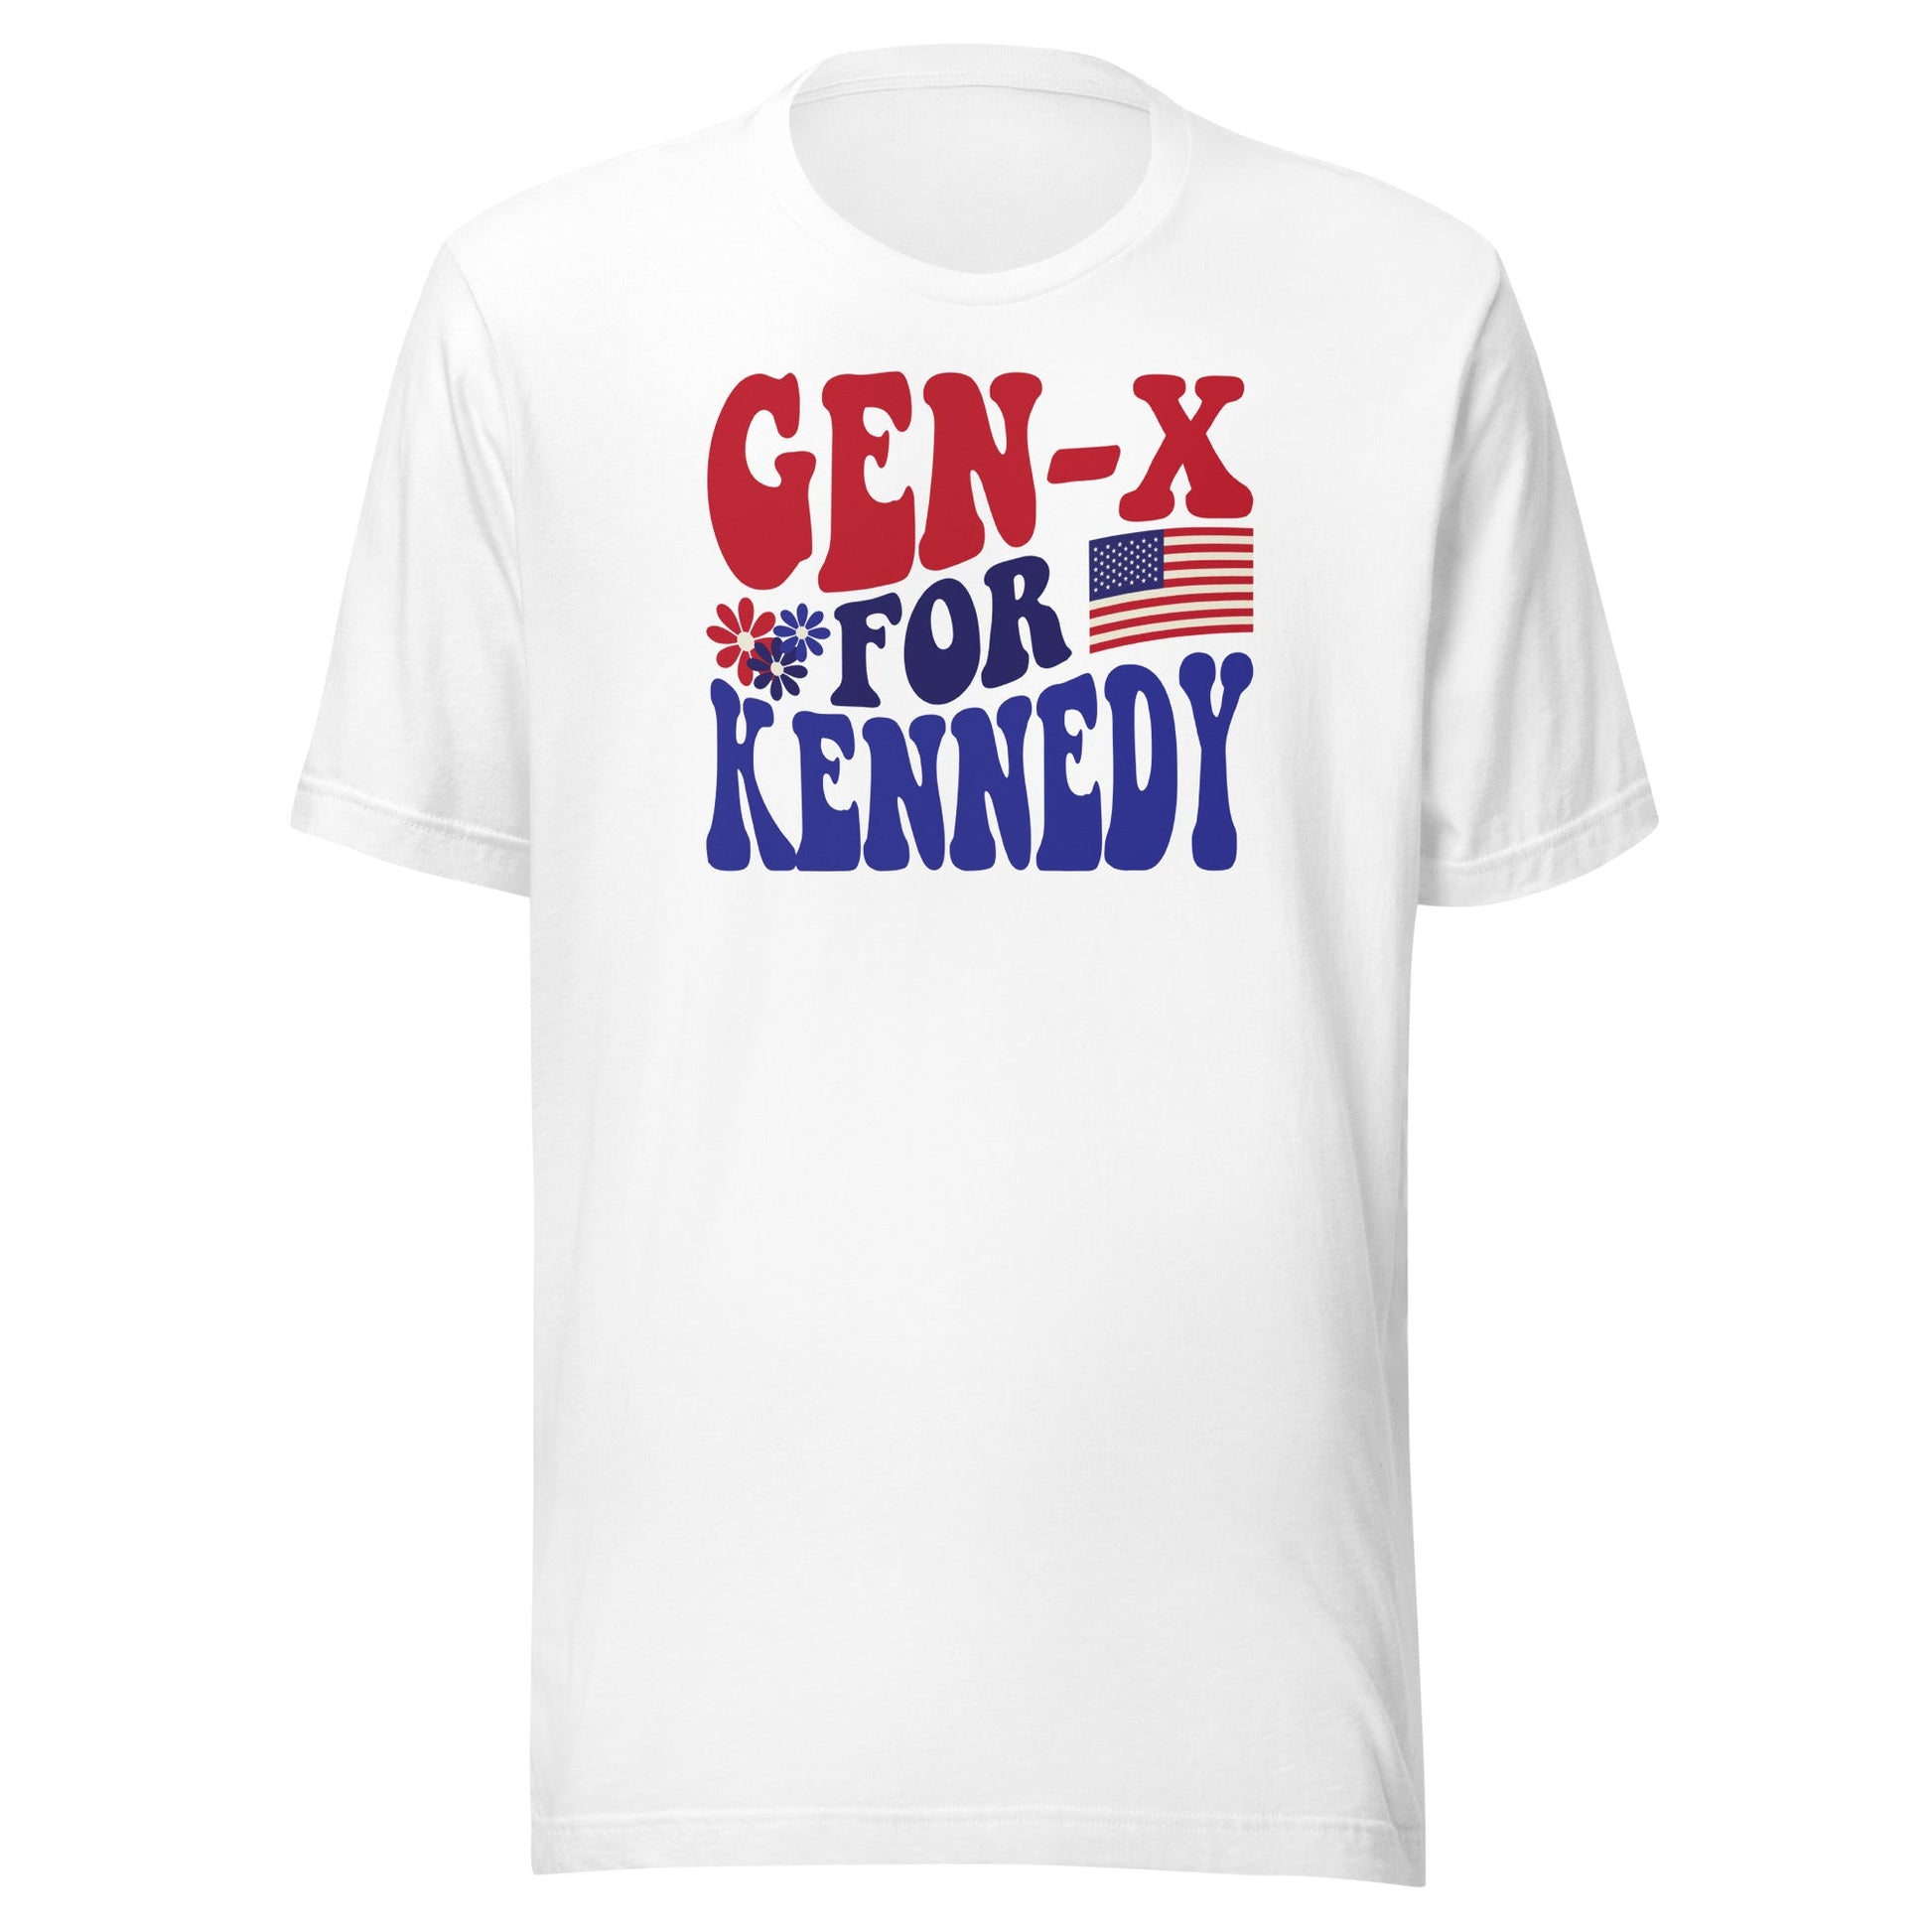 Gen - X for Kennedy Unisex Tee - TEAM KENNEDY. All rights reserved